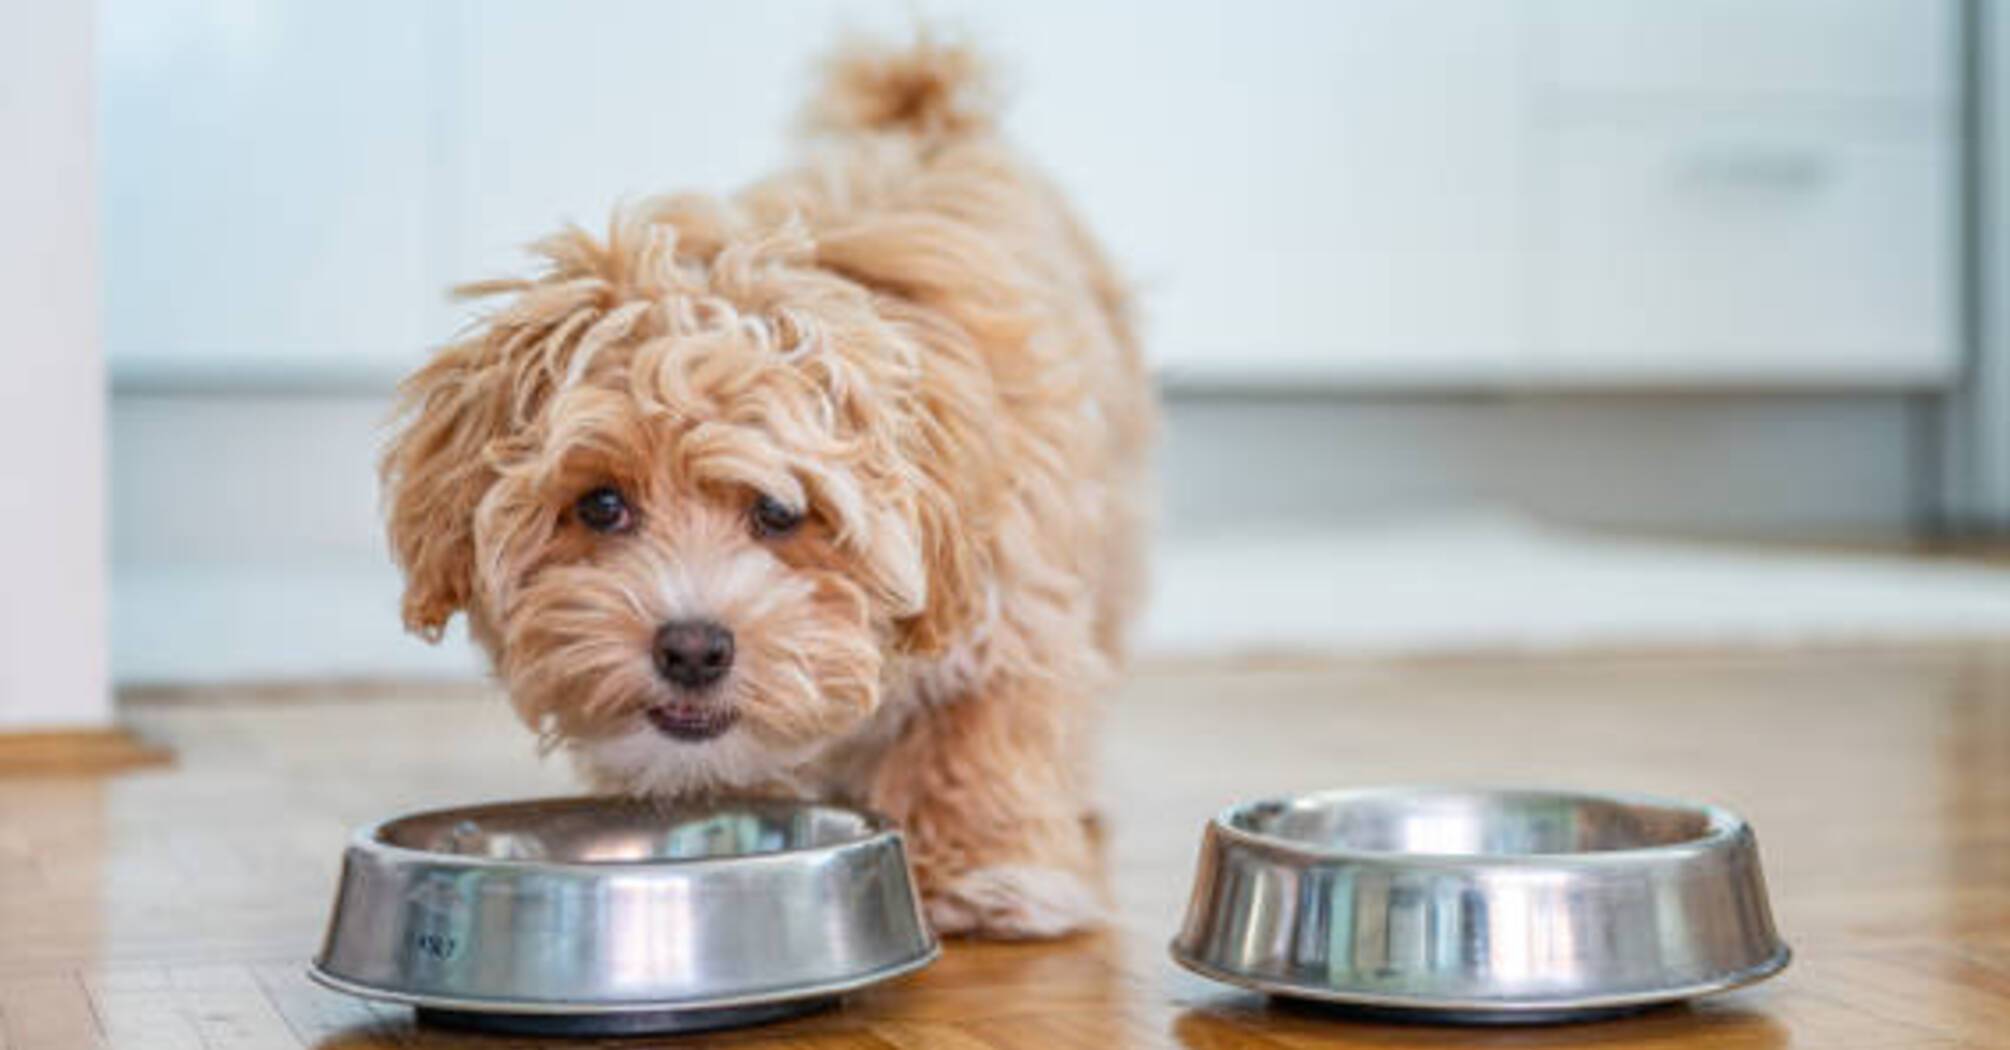 Grain-free diet for dogs: Advantages and disadvantages to know